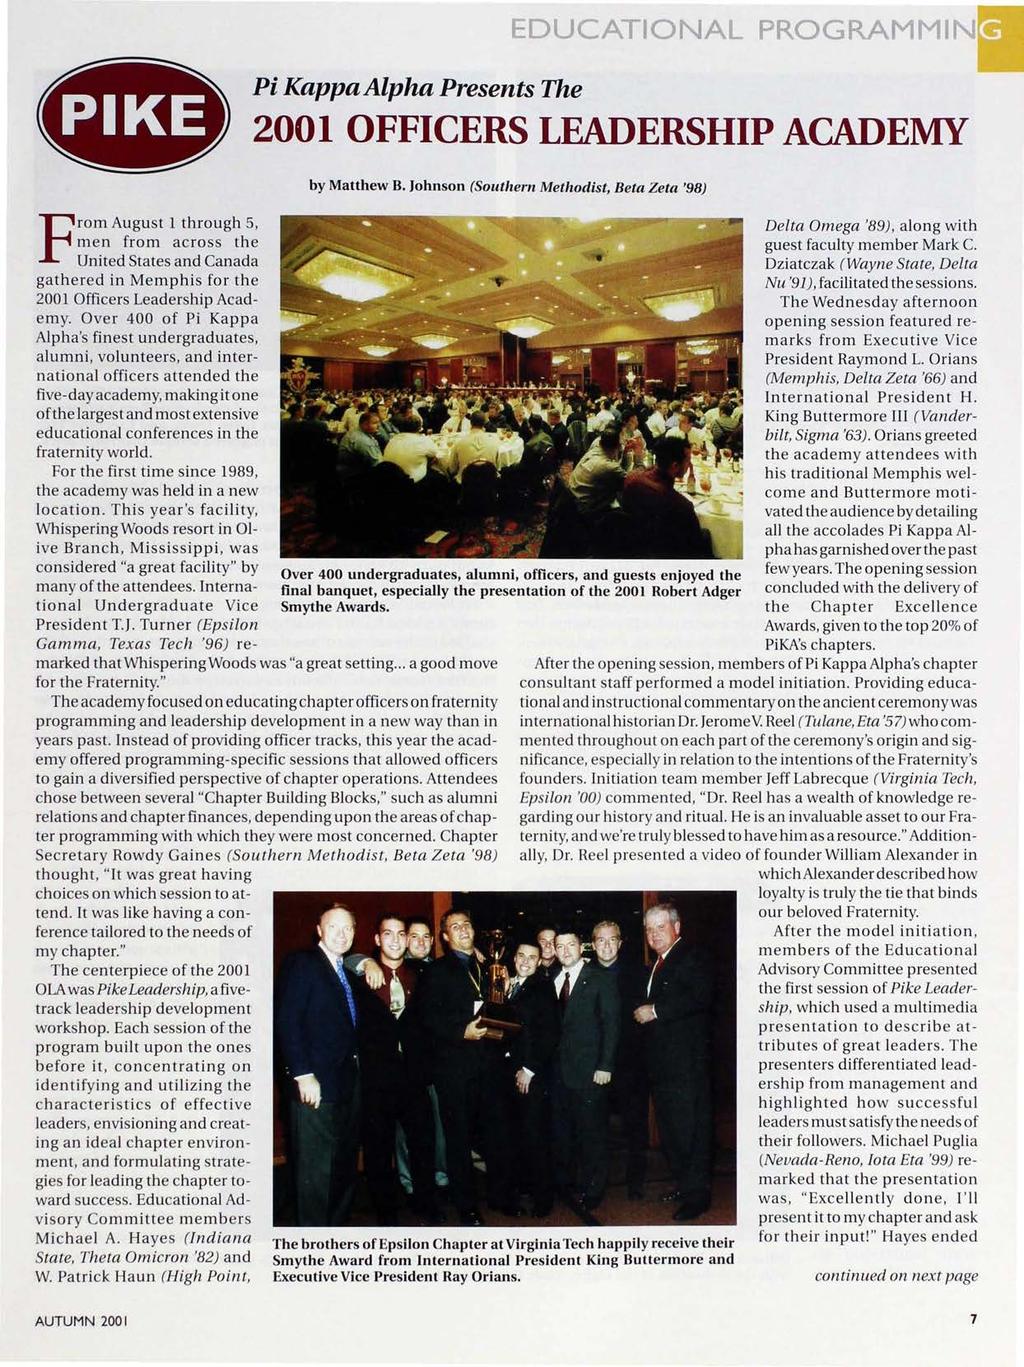 EDUCATIONAL PROGRAMMIN PIKE Pi Kappa Alpha Presents The 2001 OFFICERS LEADERSHIP ACADEMY From August 1 through 5, men from across the United States and Canada gathered in Memphis for the 2001